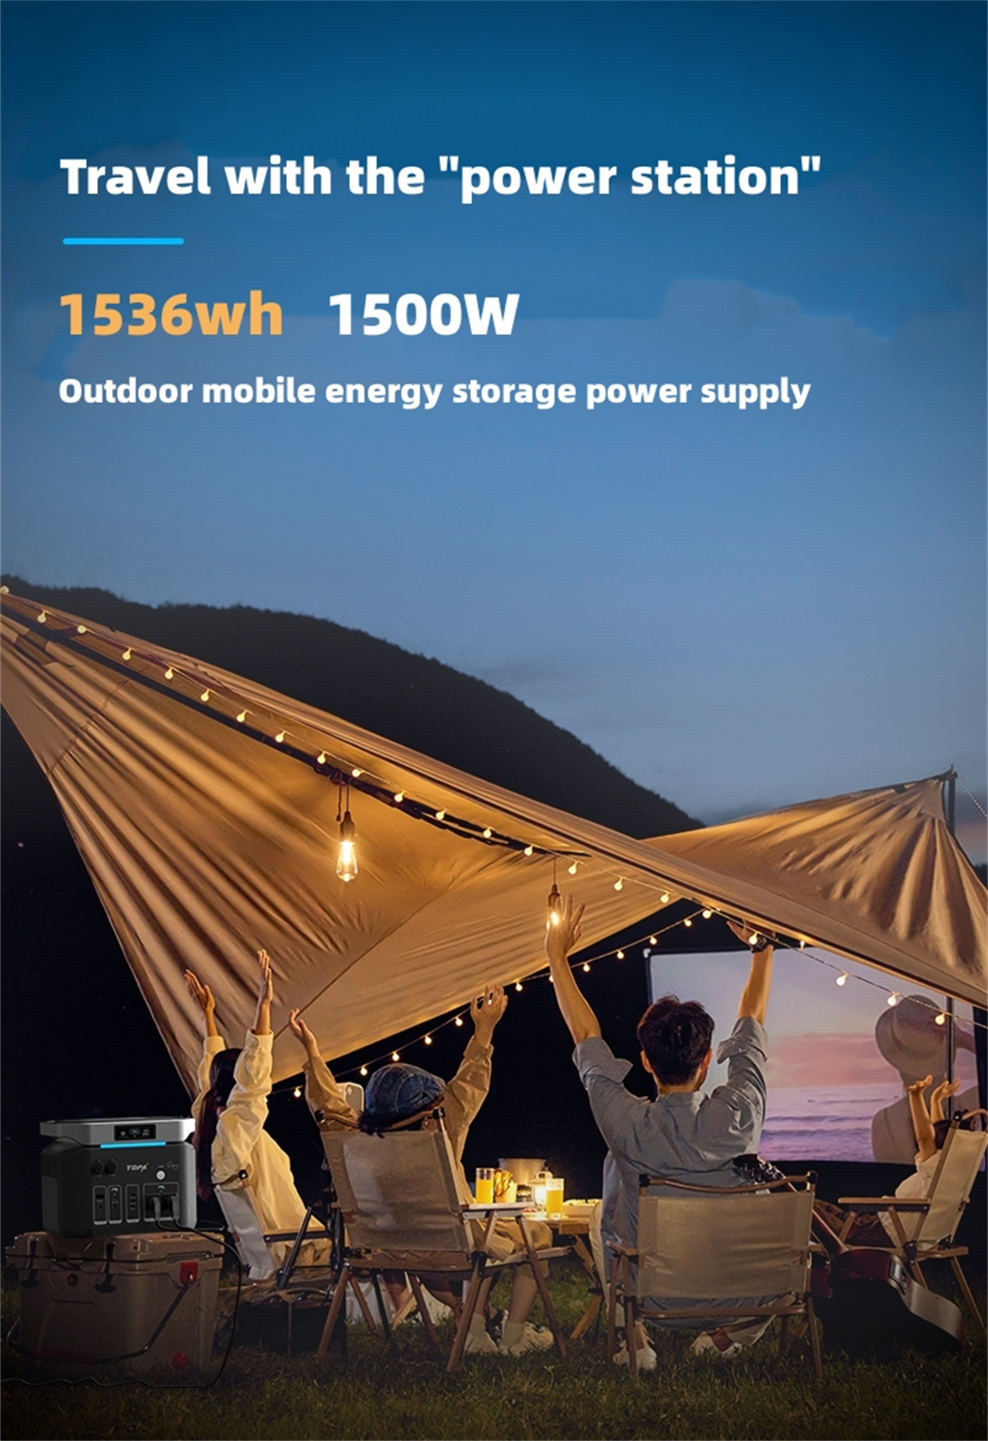 1500w Outdoor mobile energy storage power supply